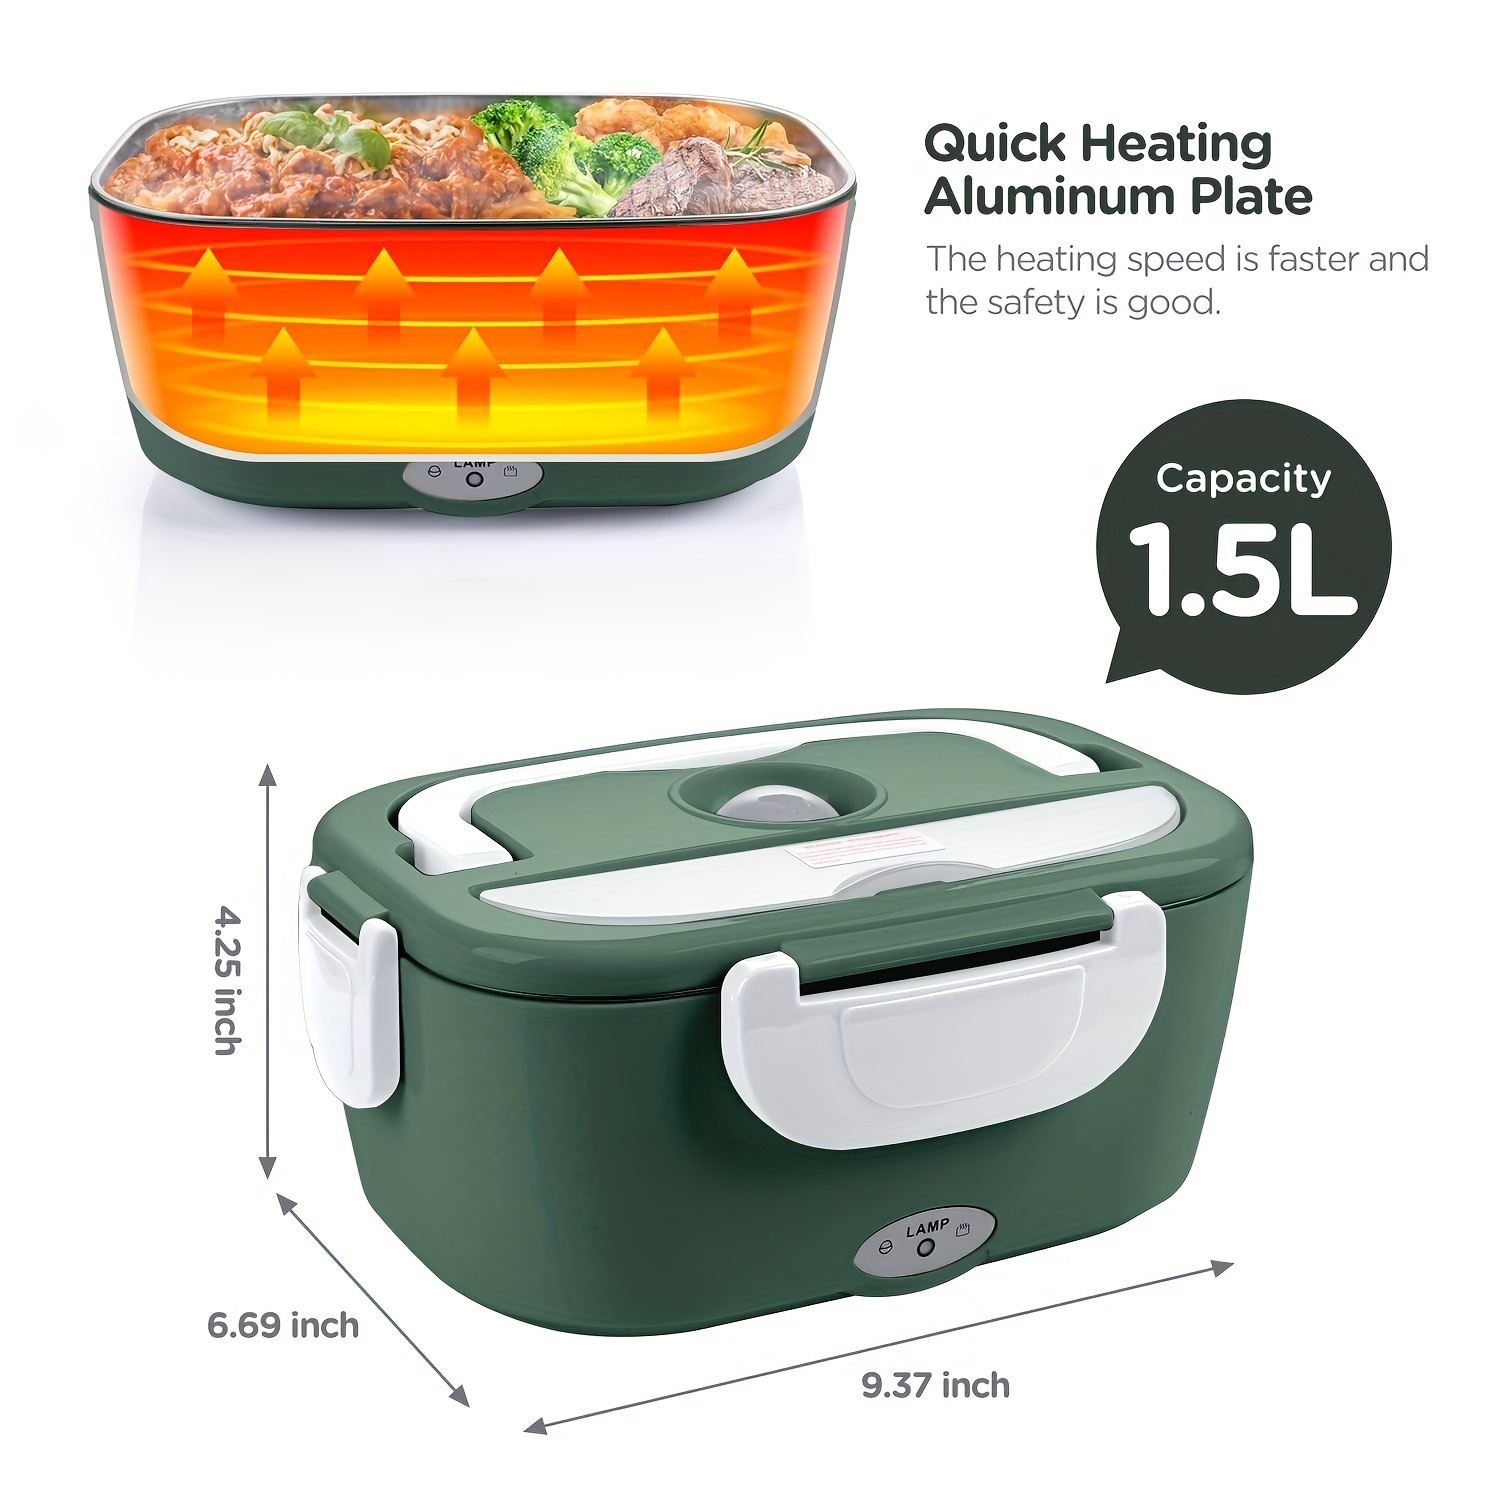 Electric Lunch Box [Upgraded],60W High-power Food Heater,12V 24V